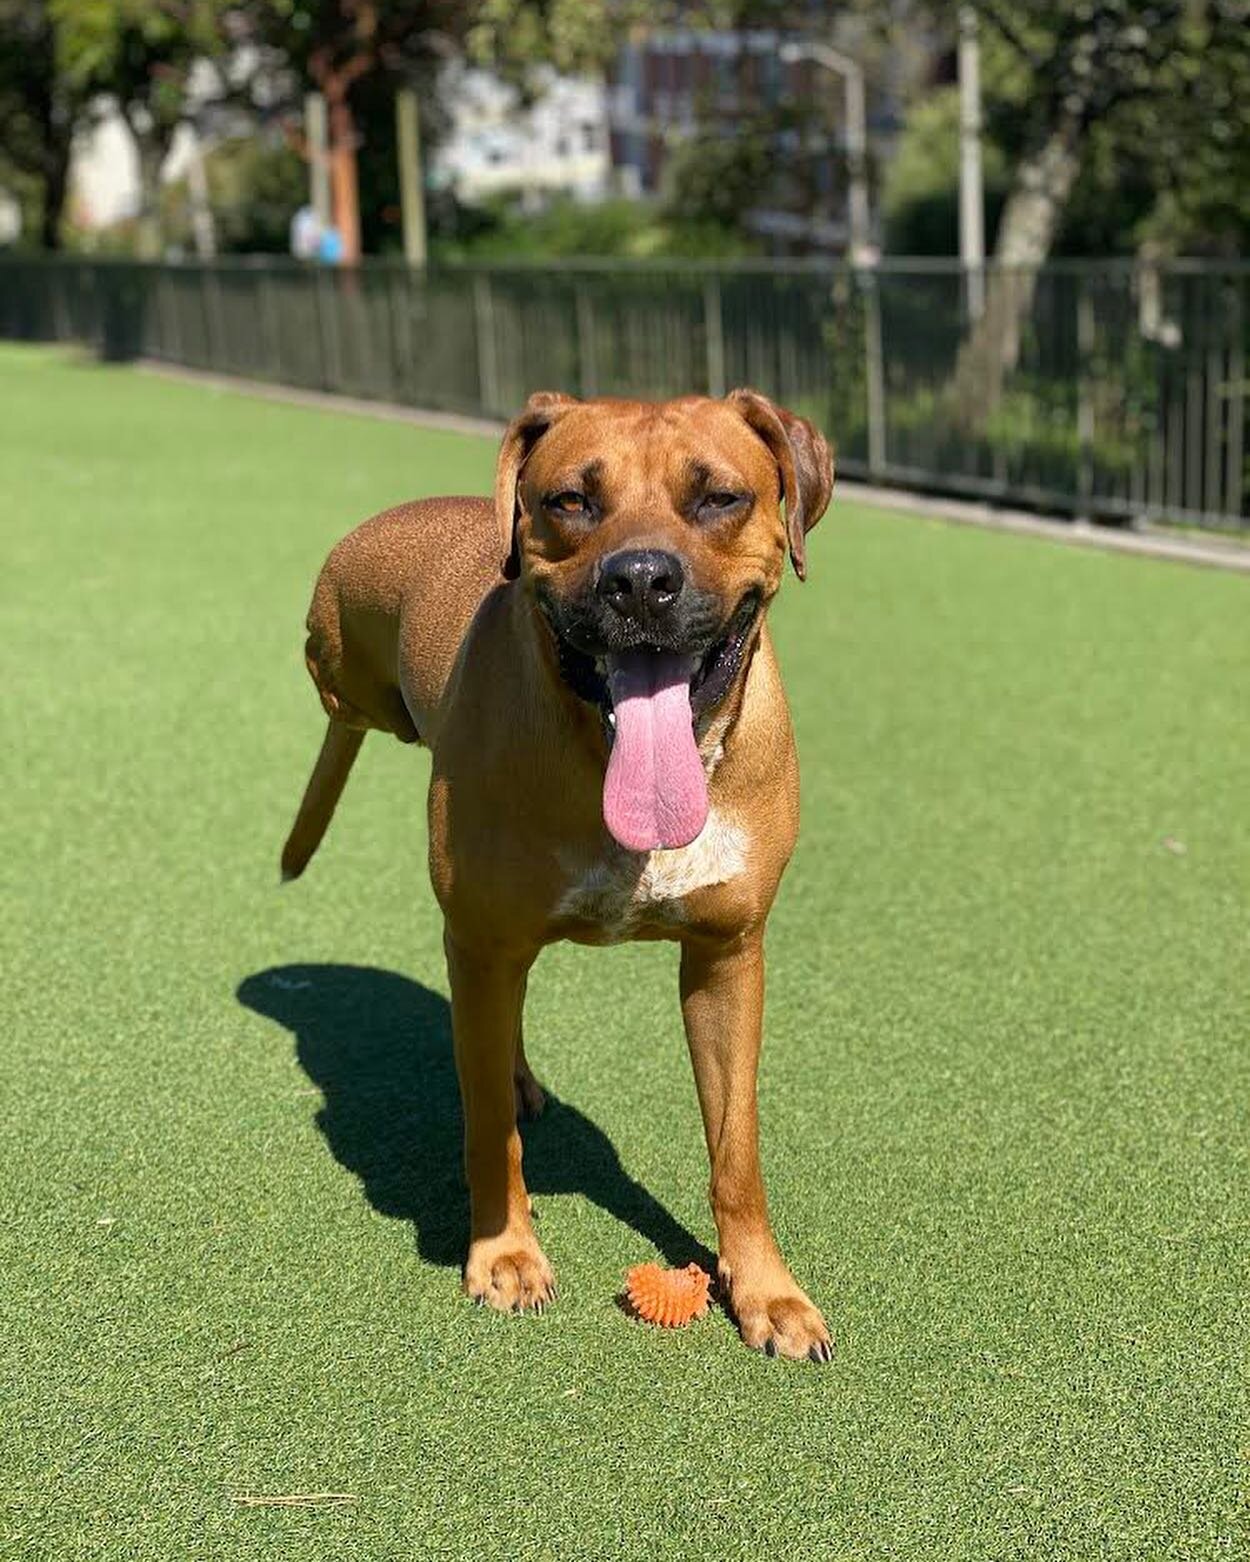 Introducing our March Pet of the Month!! This is Bruno, he is the sweetest little tripod rescue. He&rsquo;s such a joy and pleasure to be around. ❤️🥰